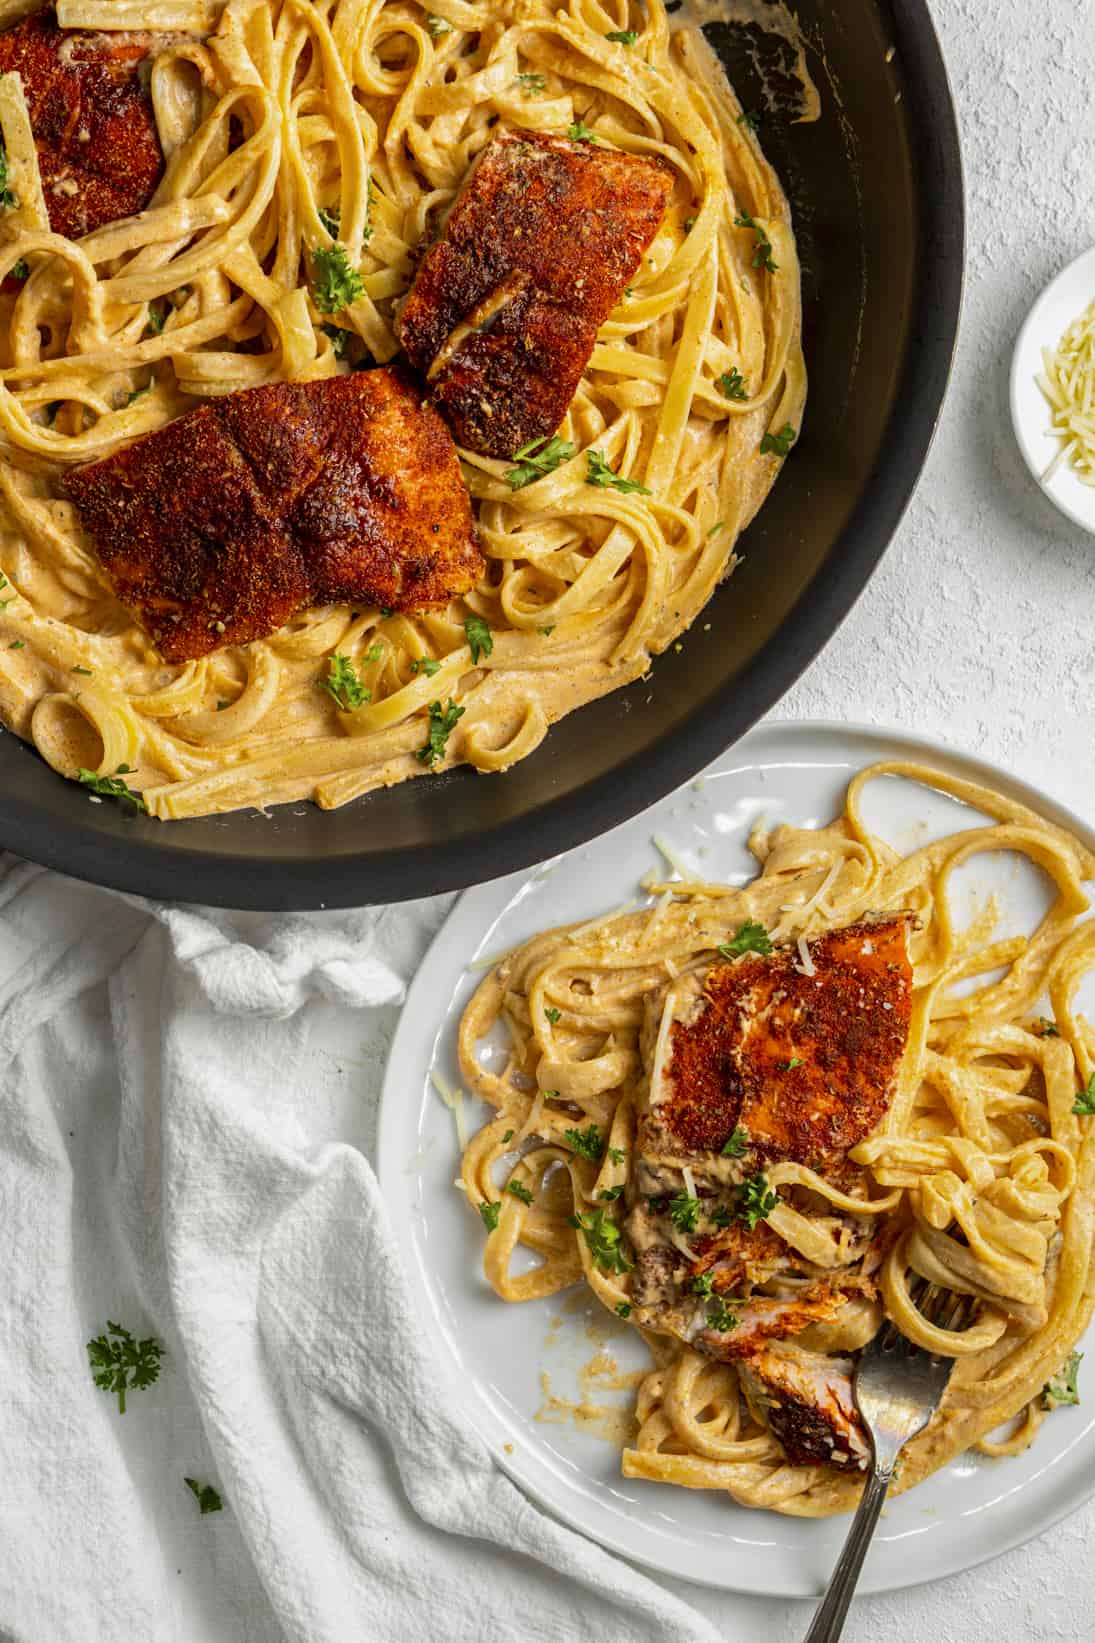 Salmon in a creamy pasta with fettuccini noodles.